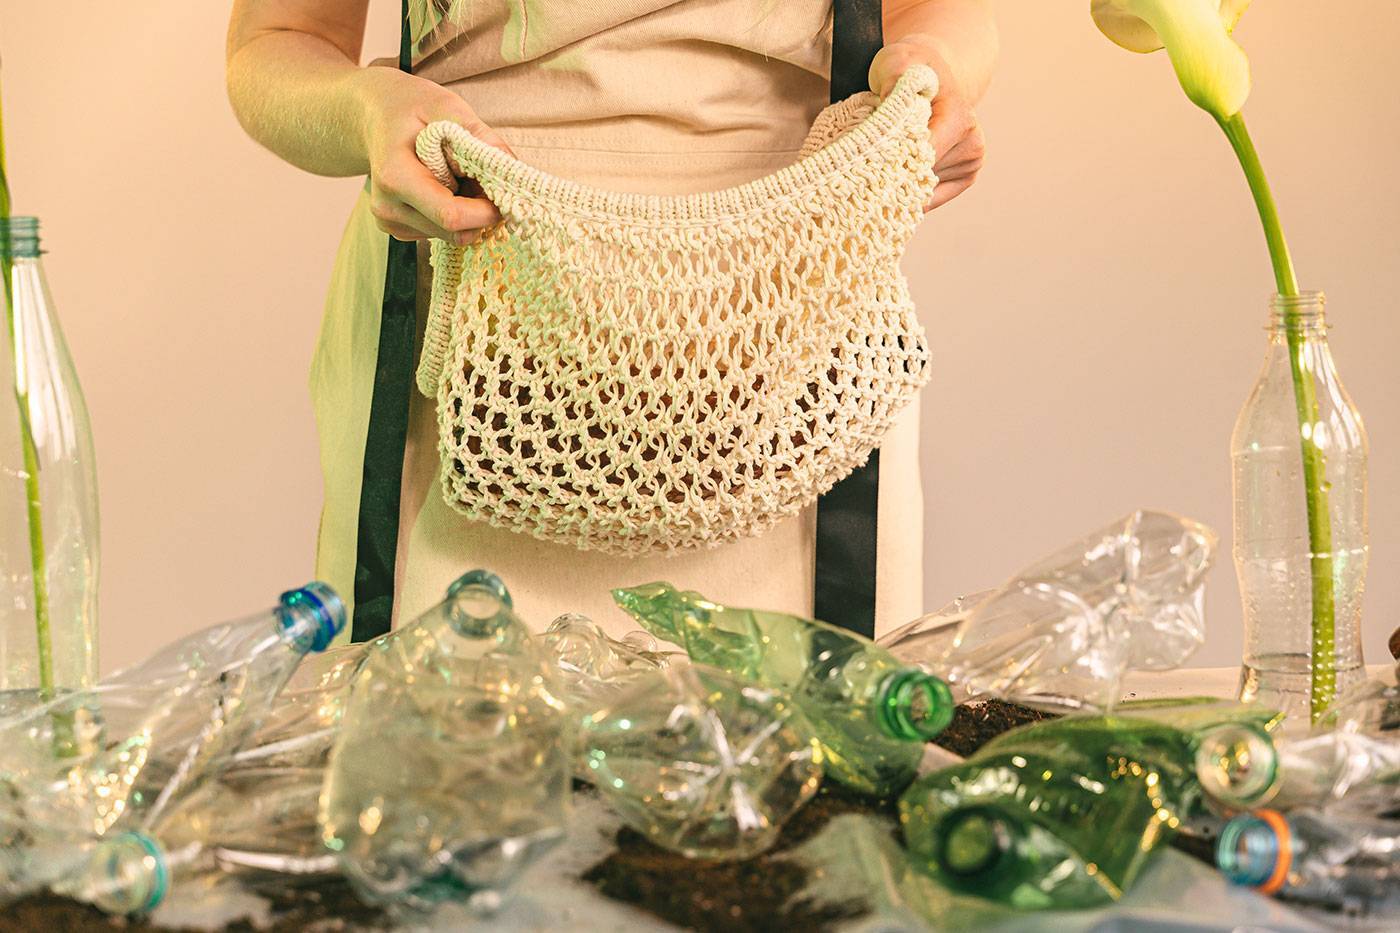 https://www.canadabrown.com/wp-content/uploads/2023/04/The-Single-Use-Plastic-Ban-Canada-Guide.jpg